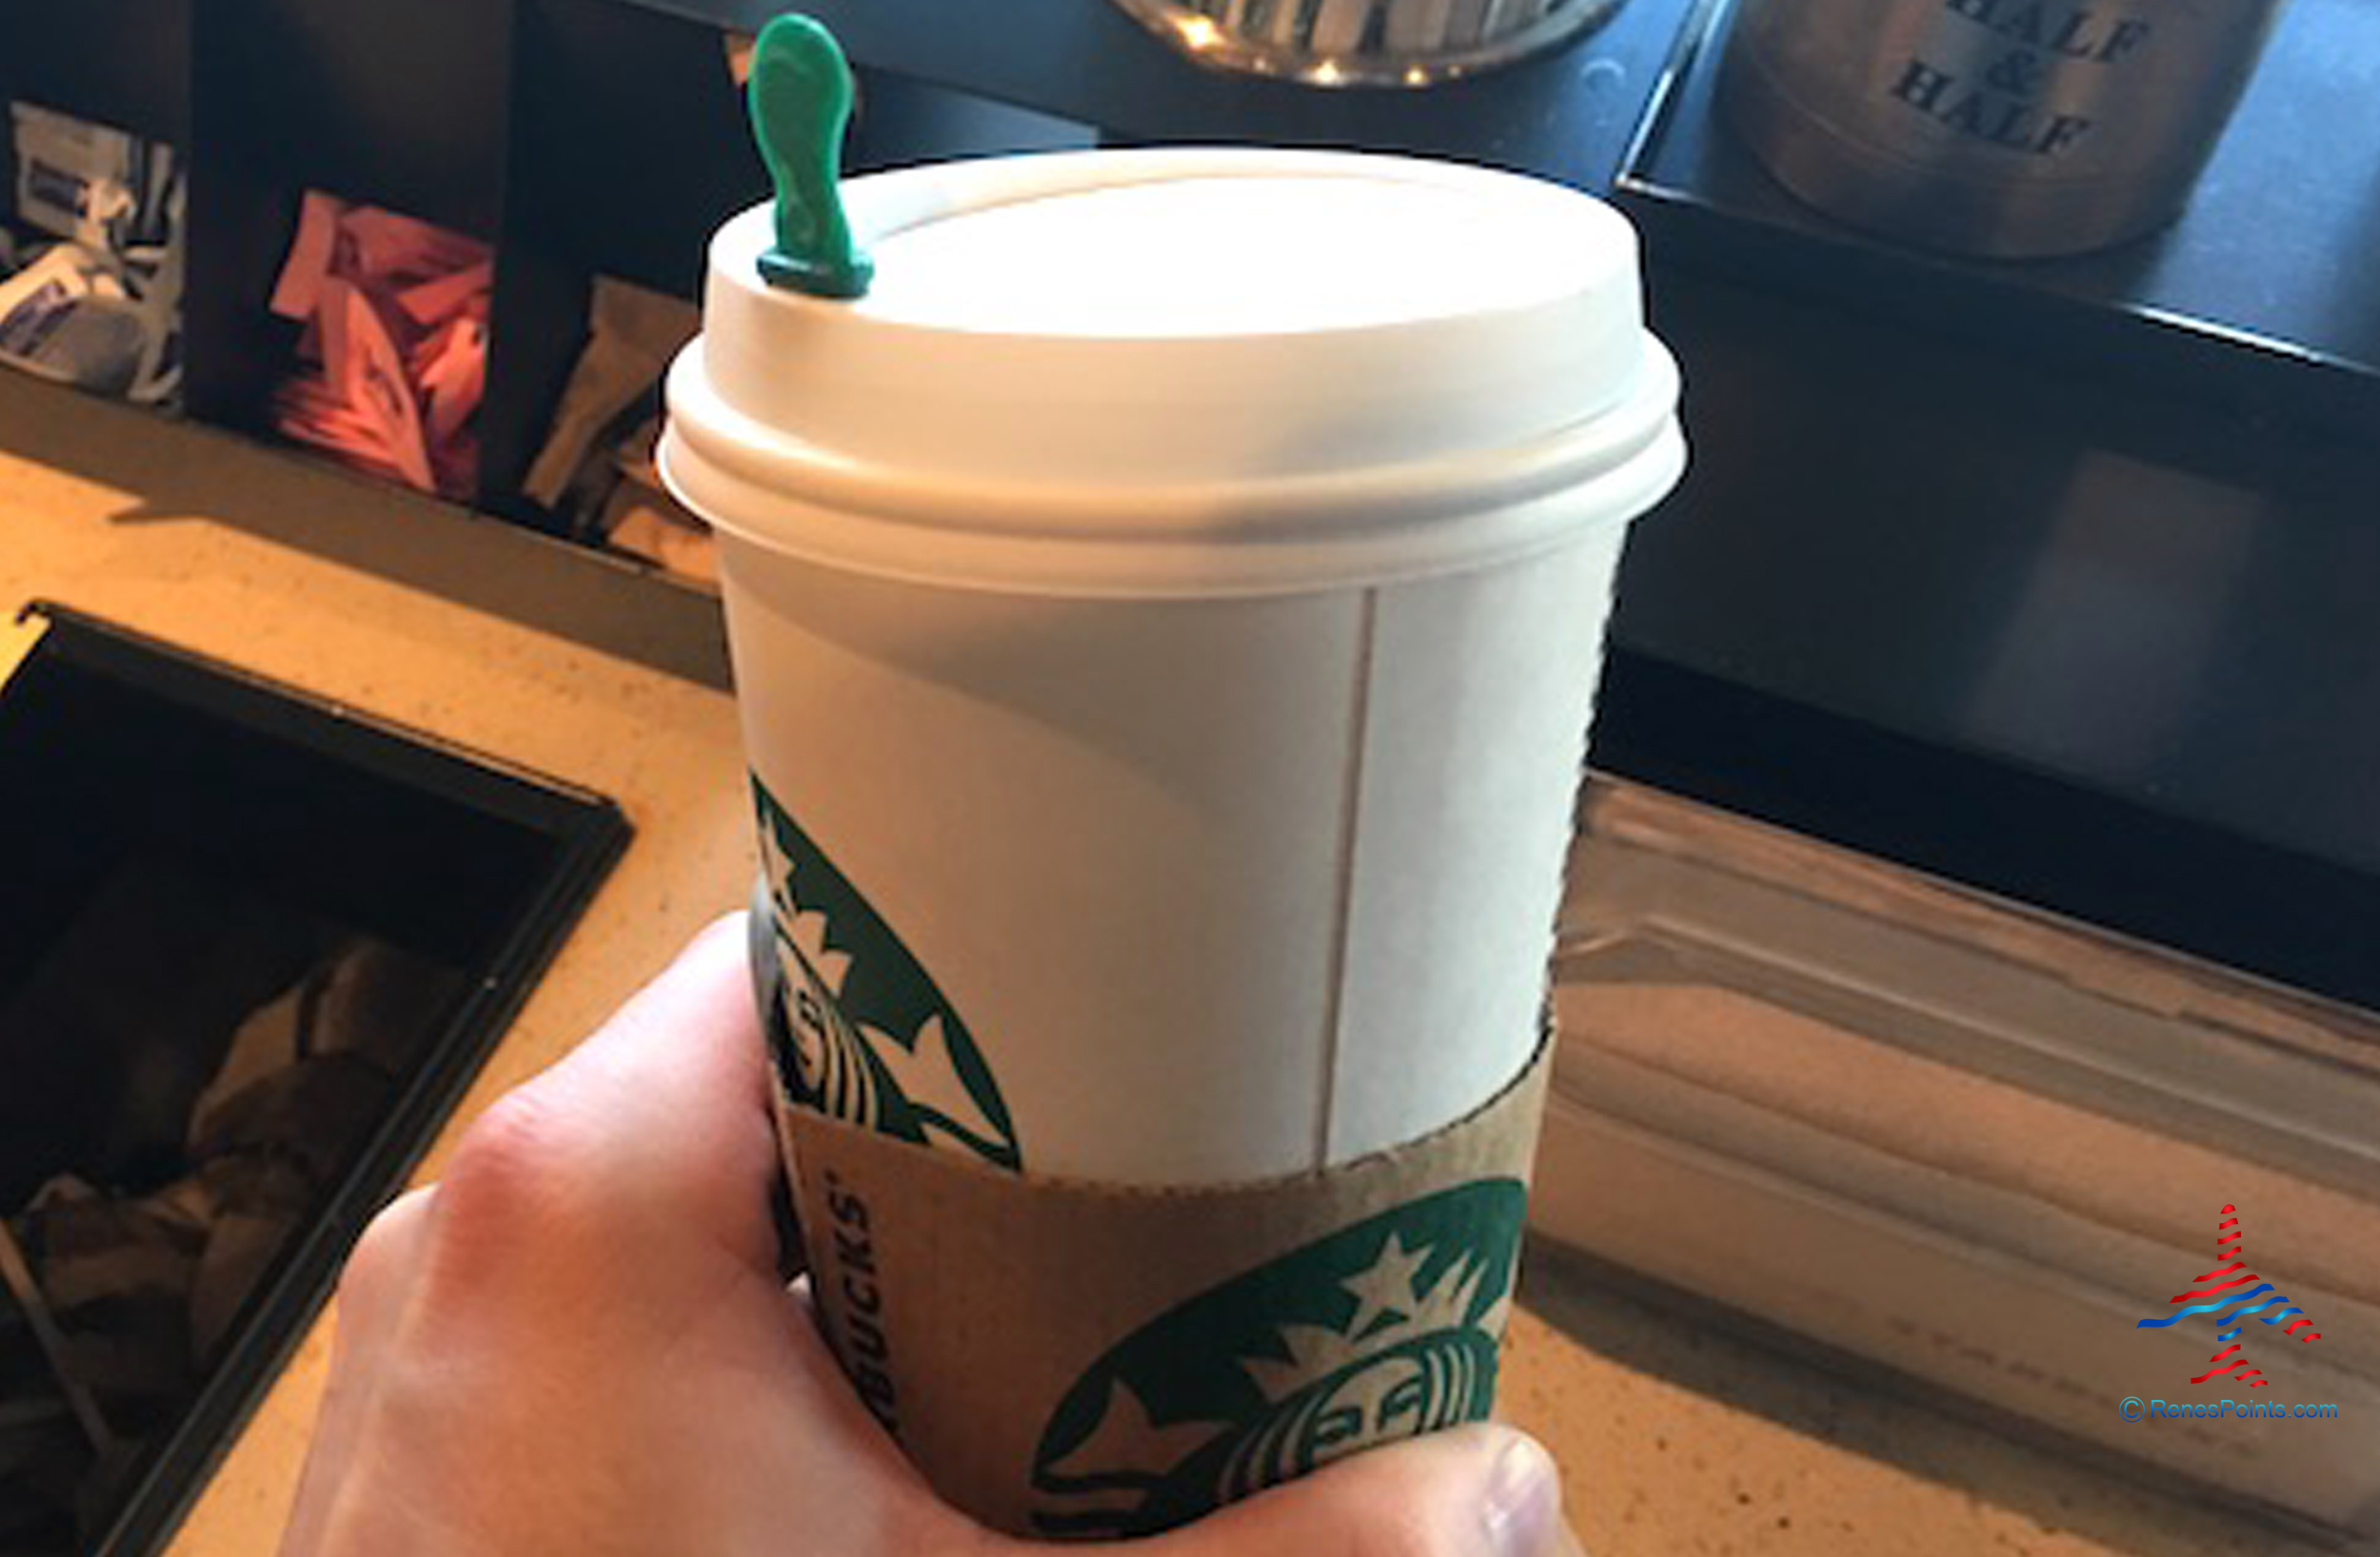 Starbucks coffee cup in hand